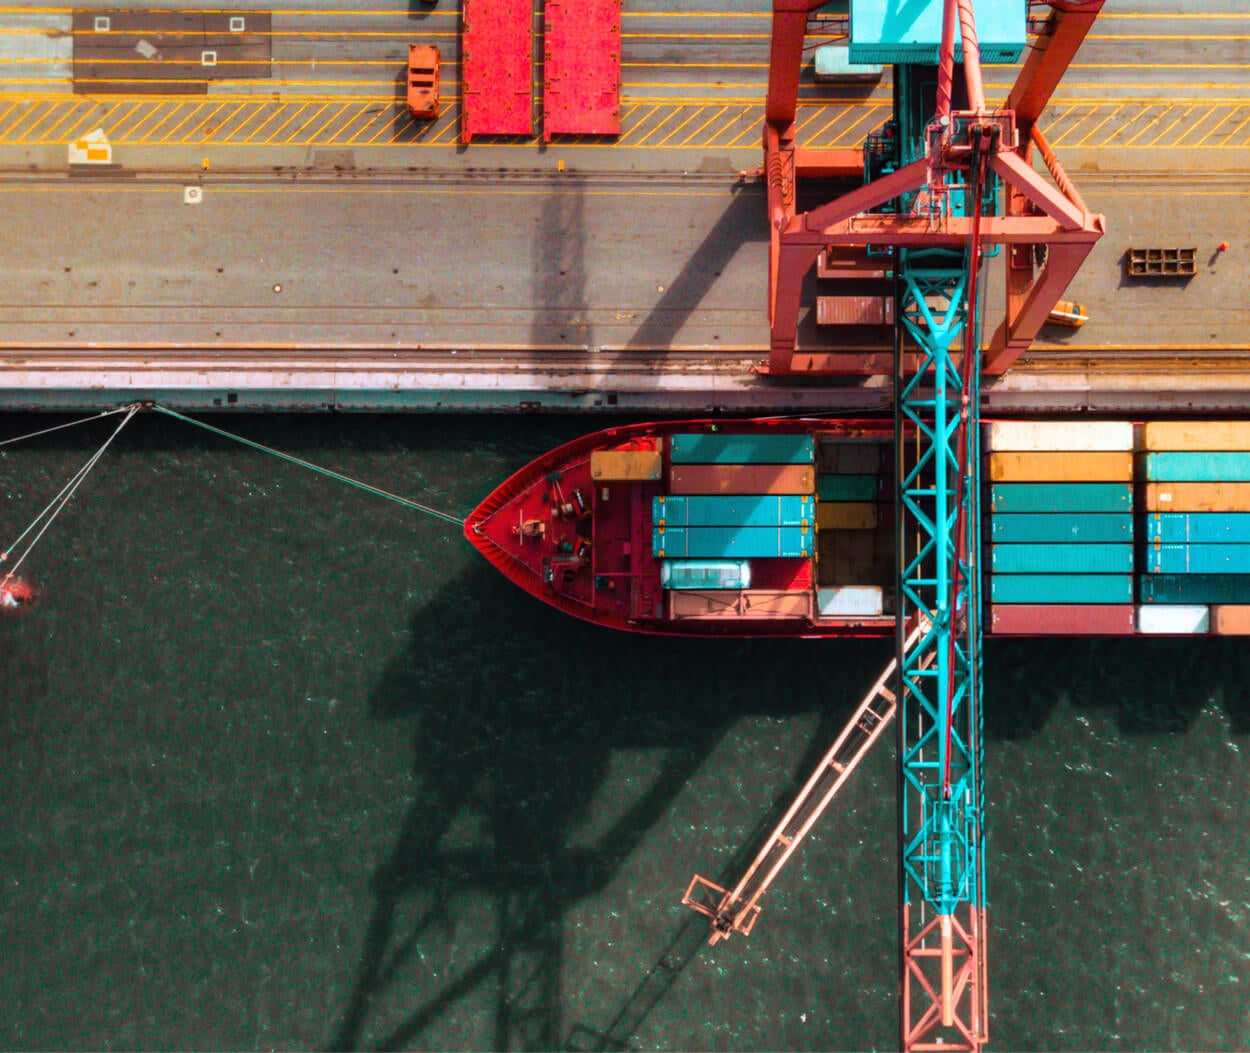 Aerial view of a container crane and a cargo ship